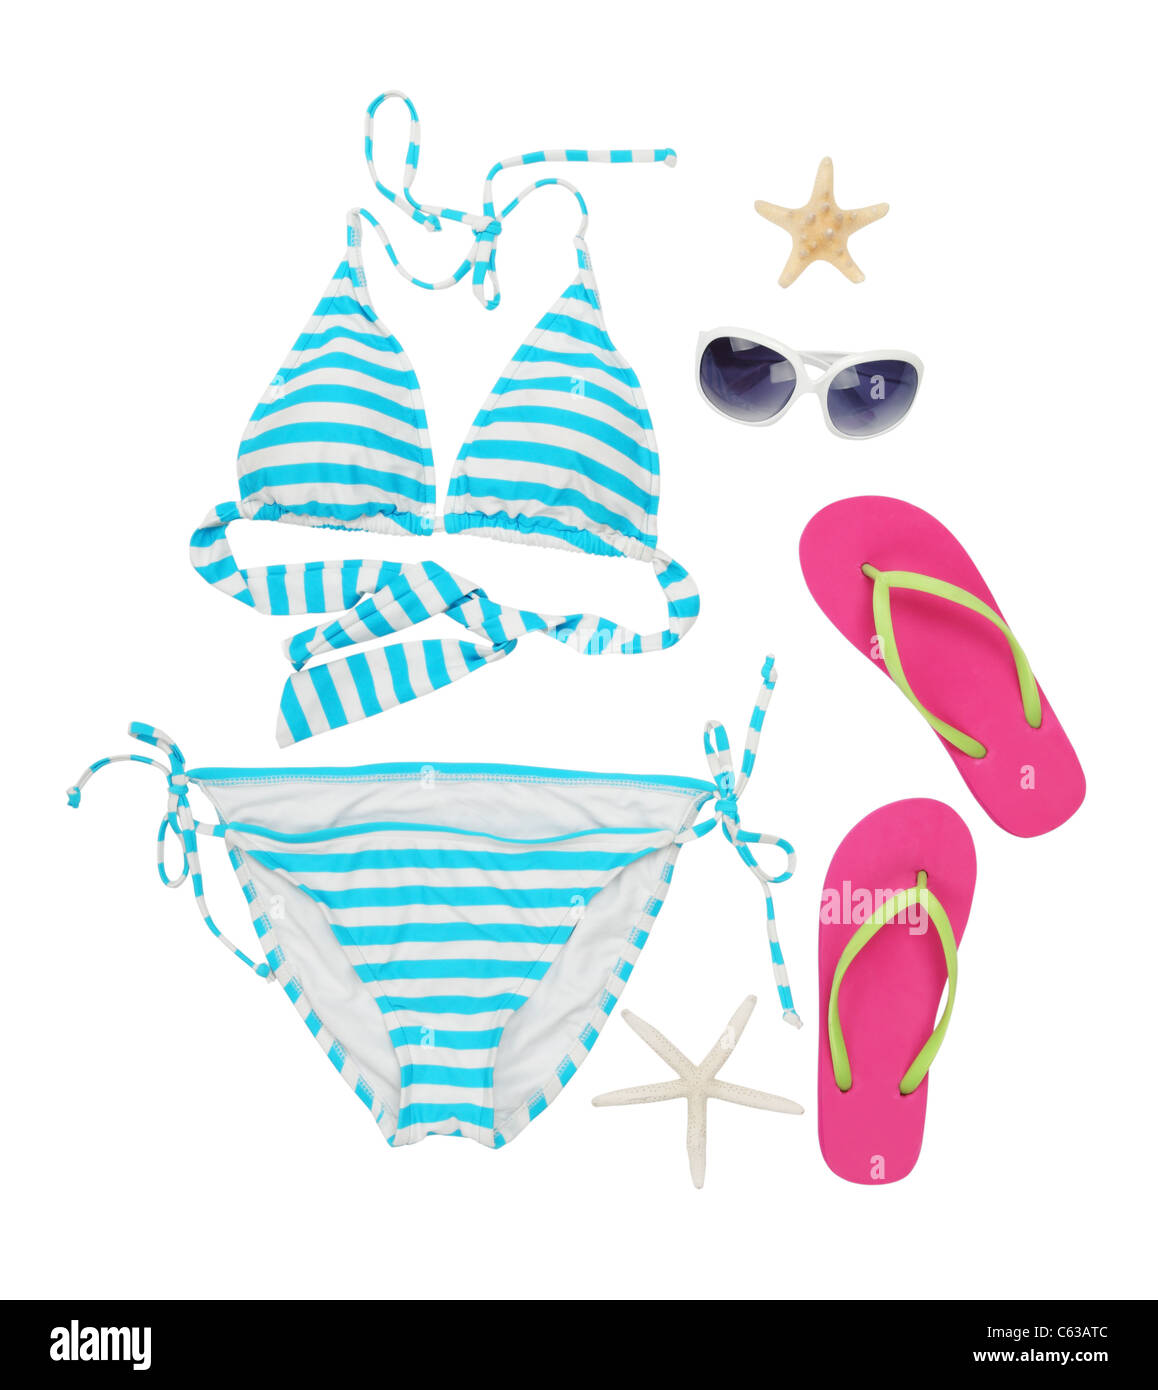 Swimming suit on white background,clipping path included. Stock Photo